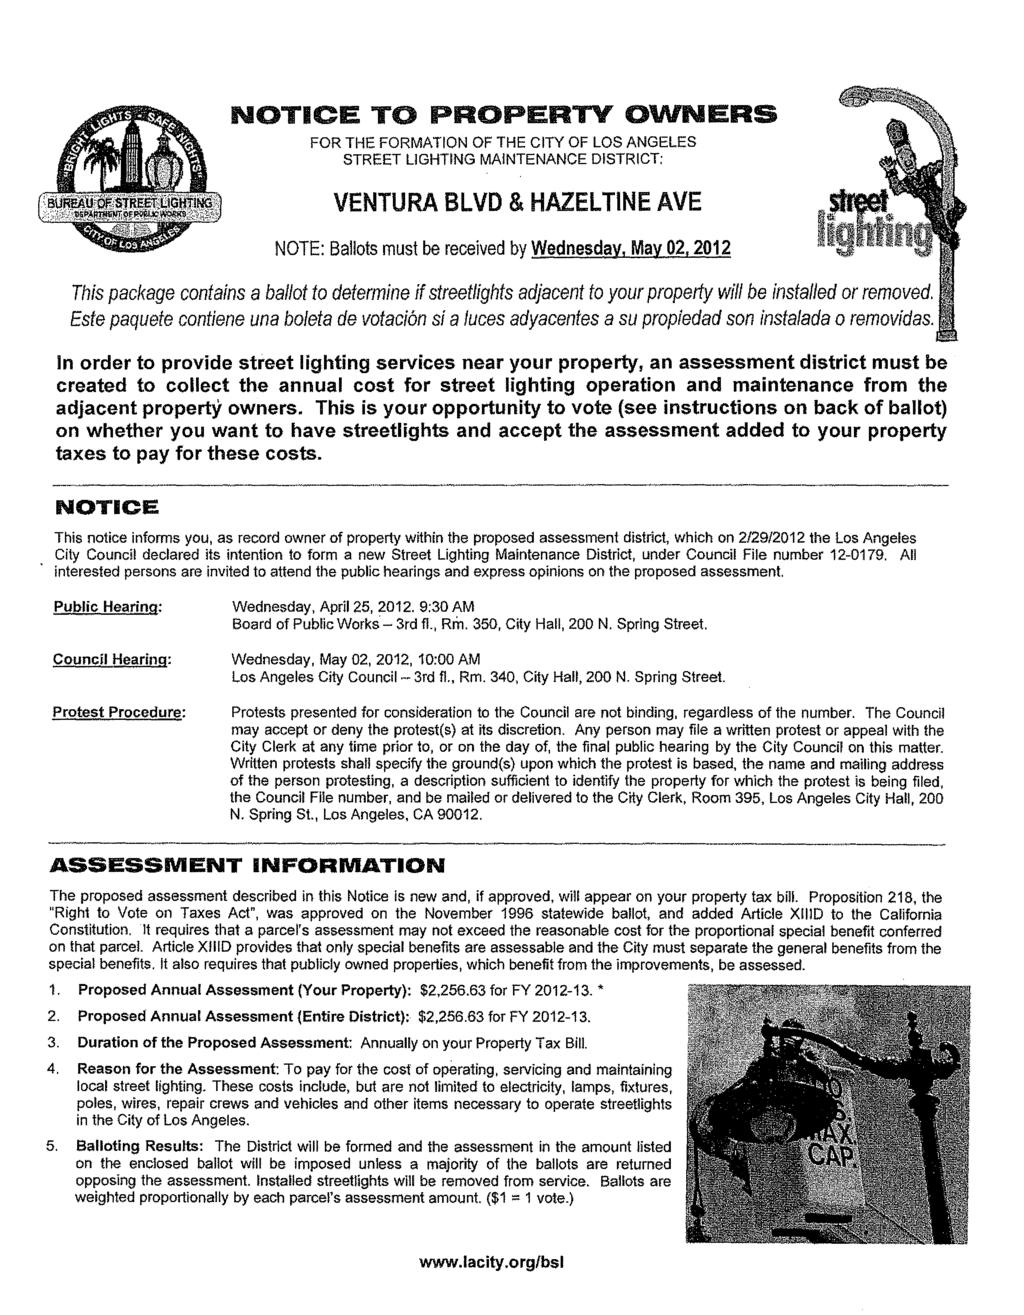 NOTICE TO PROPERTY OWNERS FOR THE FORMATION OF THE CITY OF LOS ANGELES STREET LIGHTING MAINTENANCE DISTRICT: VENTURA BLVD & HAZELTINE AVE NOTE: Ballots must be received by Wednesday, May 02, 2012